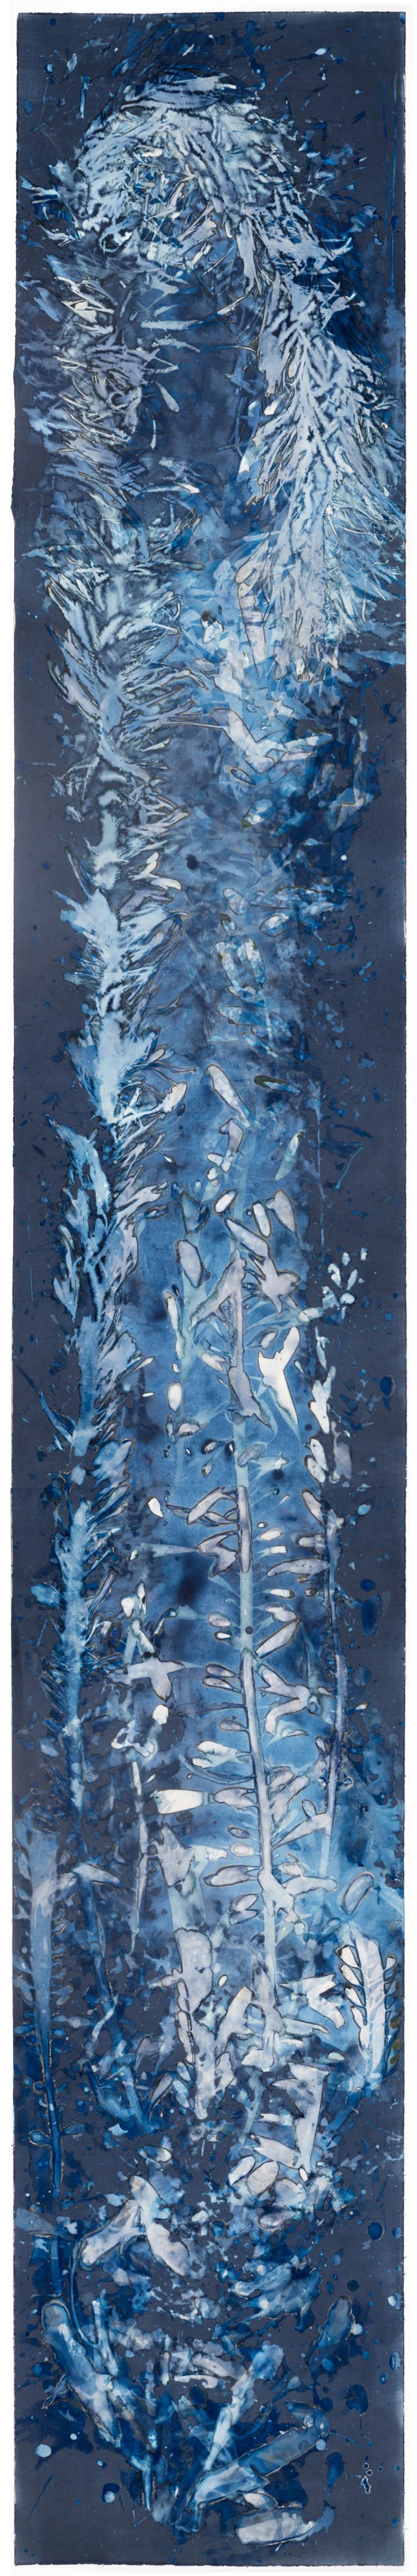 Paola Davila Color Photograph - Laminariales XXII From the series Bosque Cyanotype photograph 